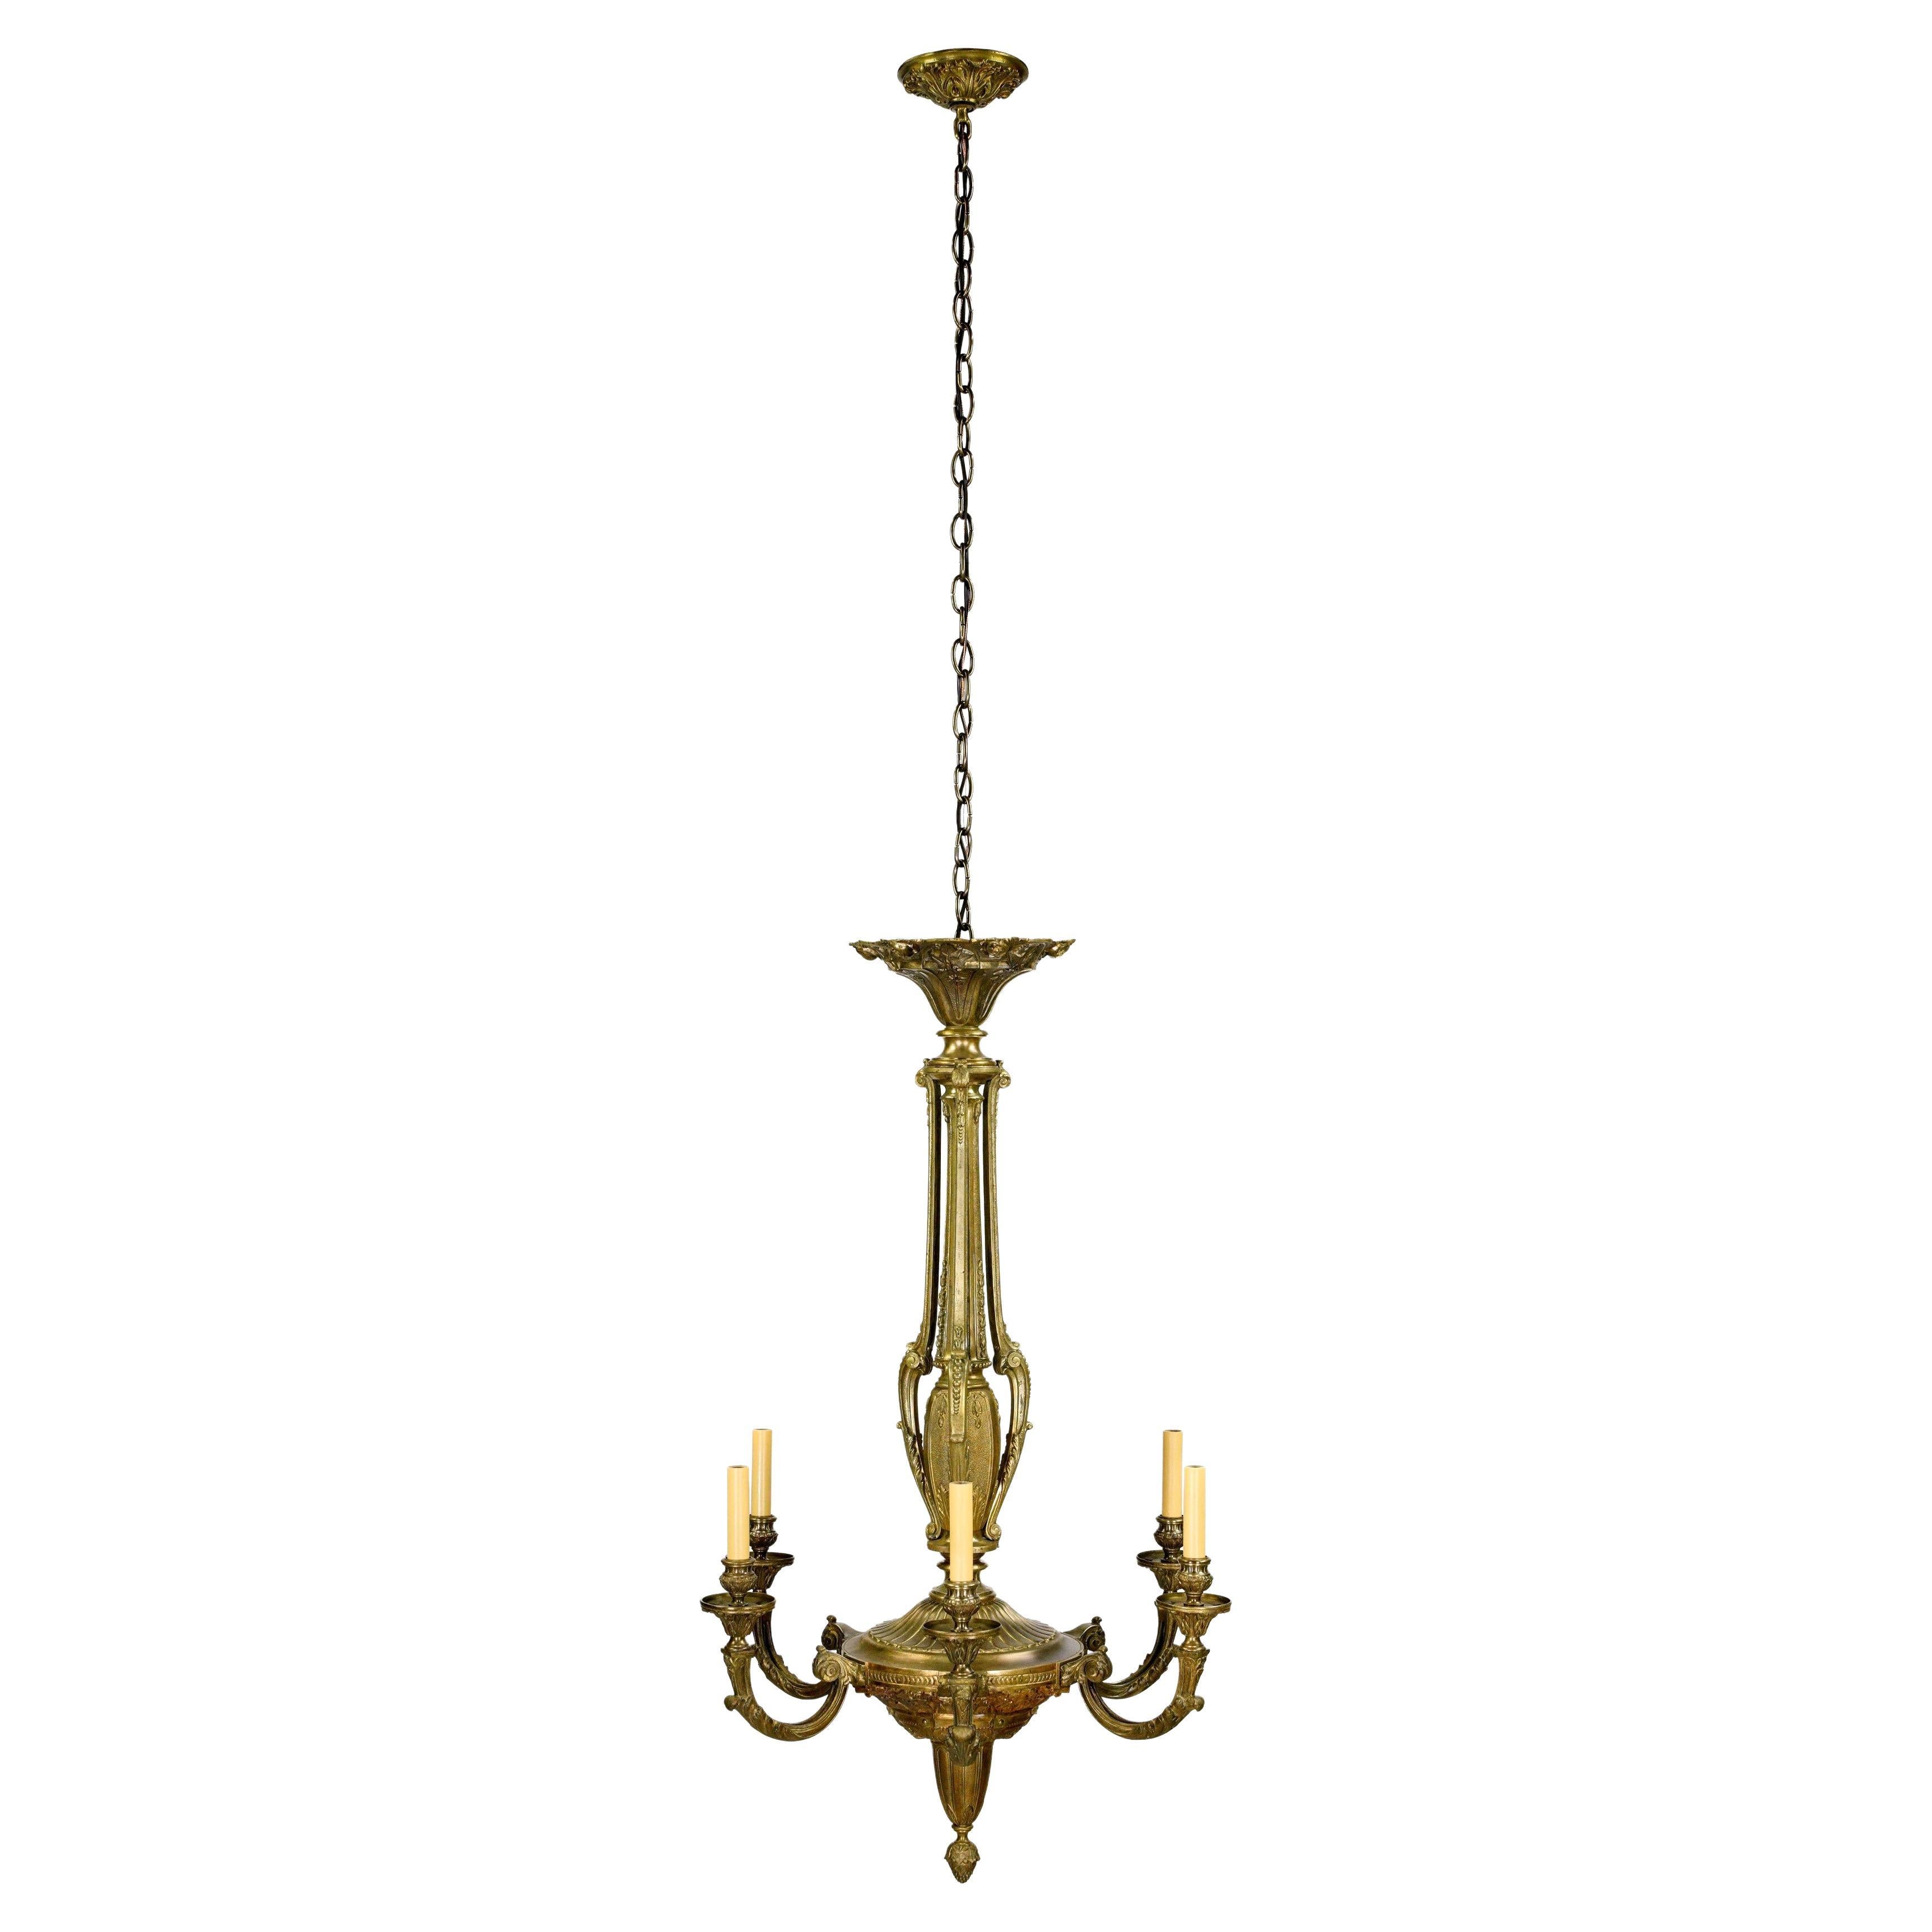 Restored Antique French Bronze Ornate 6 Arm Chandelier For Sale